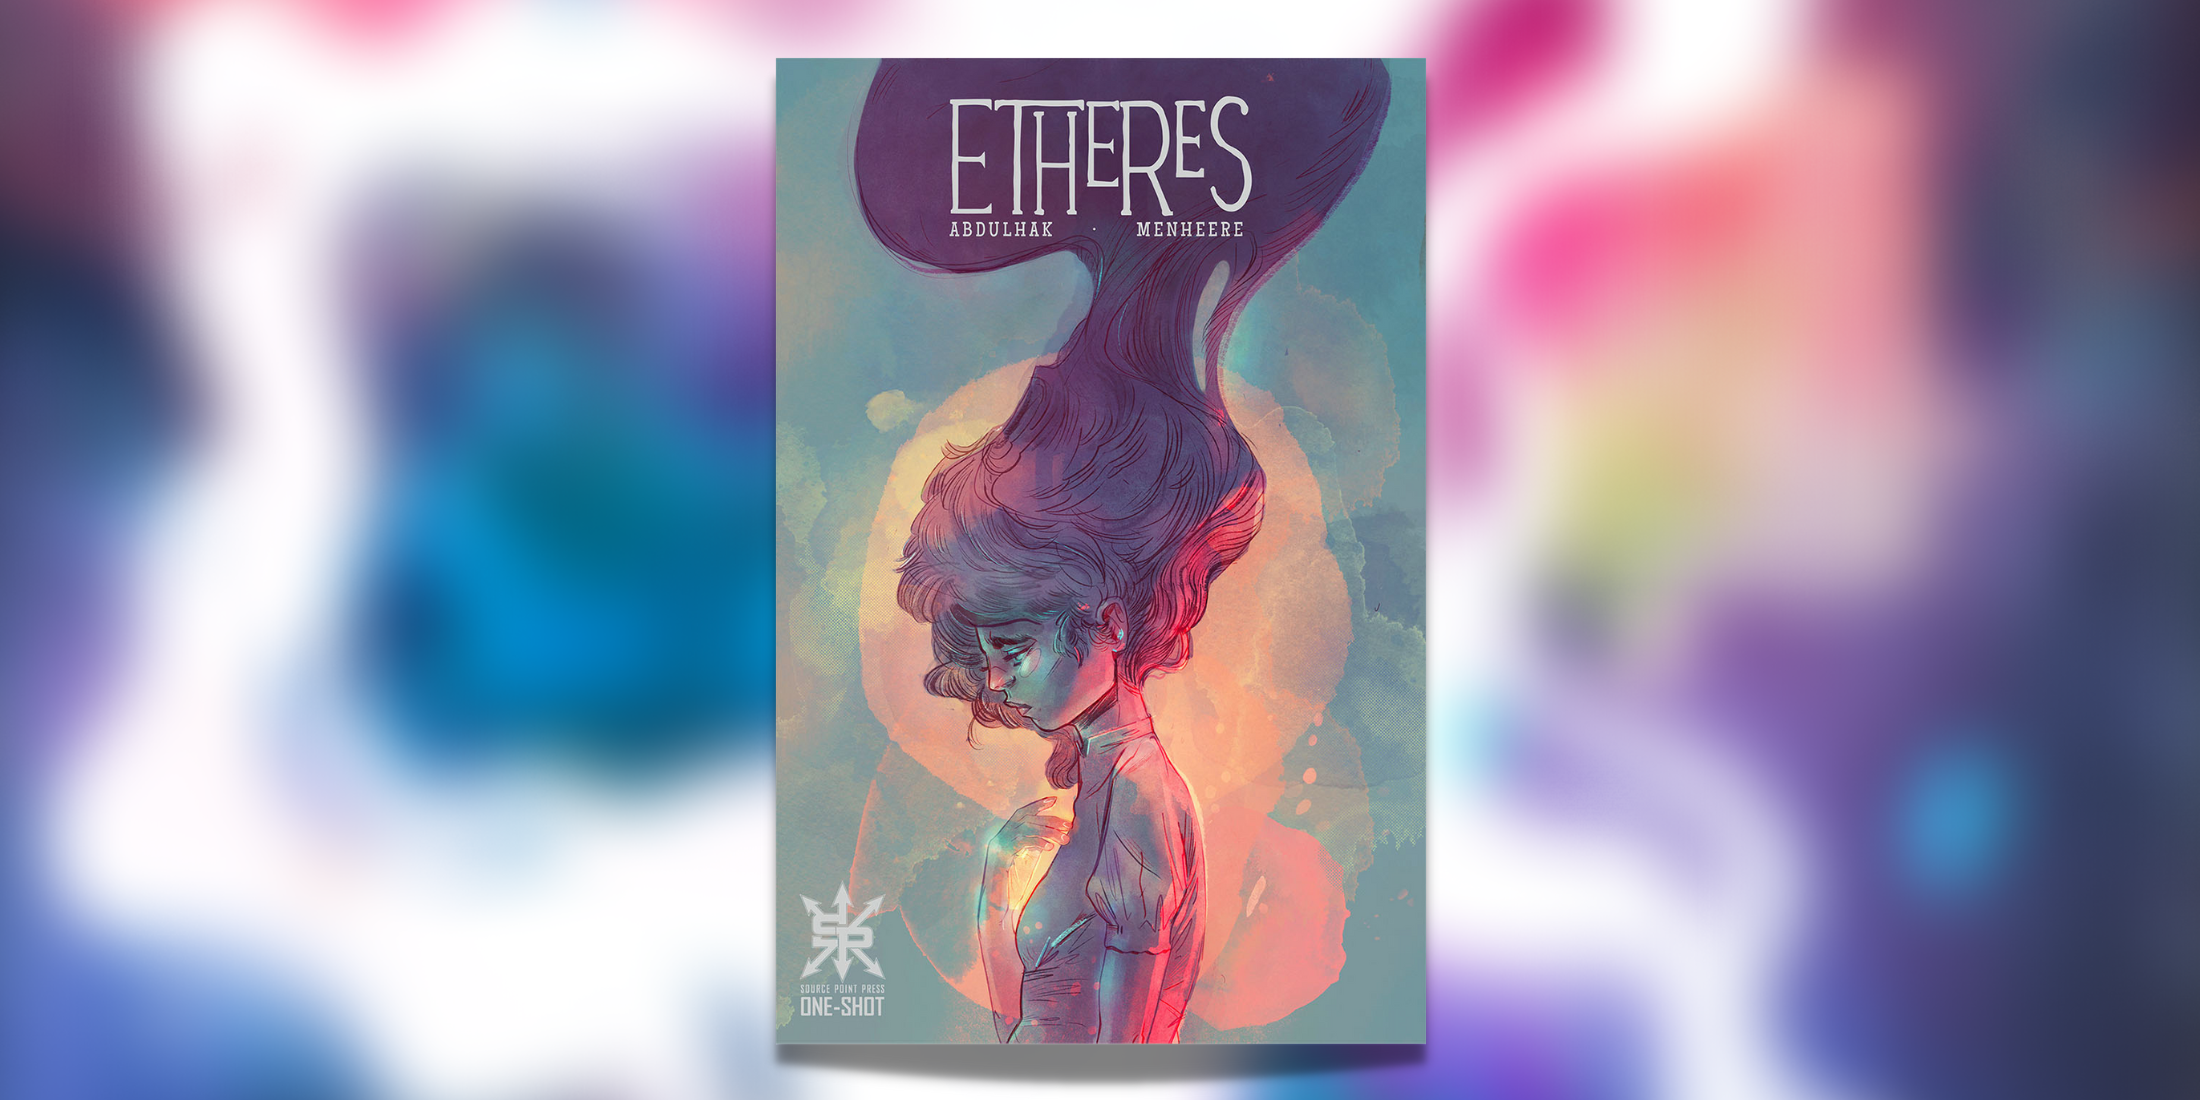 Etheres Review: The Most Important Story Told This Year